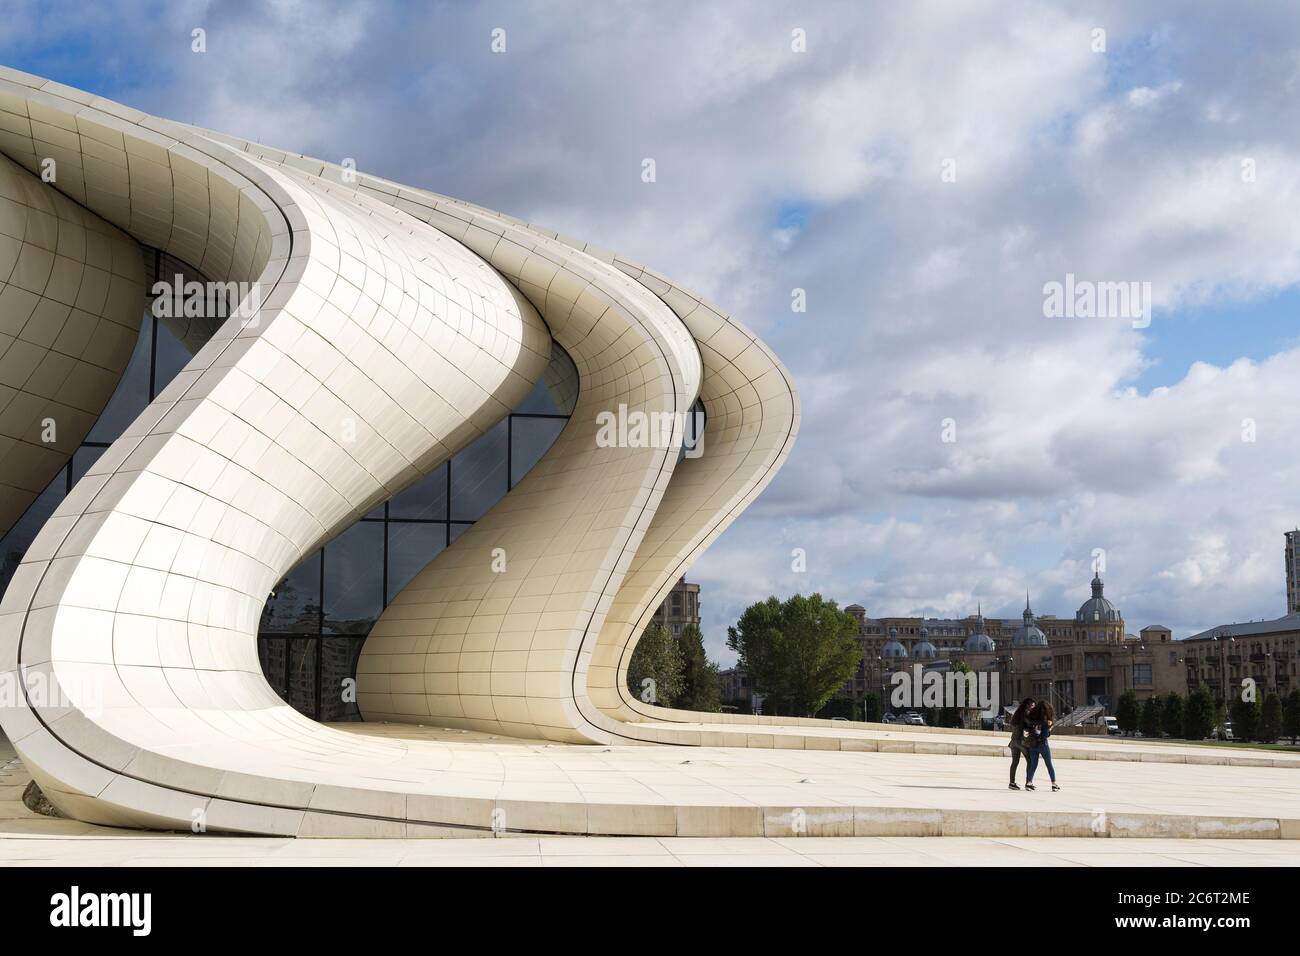 Two teenage girls running up the front of the Heydar Aliyev center, designed by Zaha Hadid the centerpiece of modern architecture in Baku Azerbaijan Stock Photo